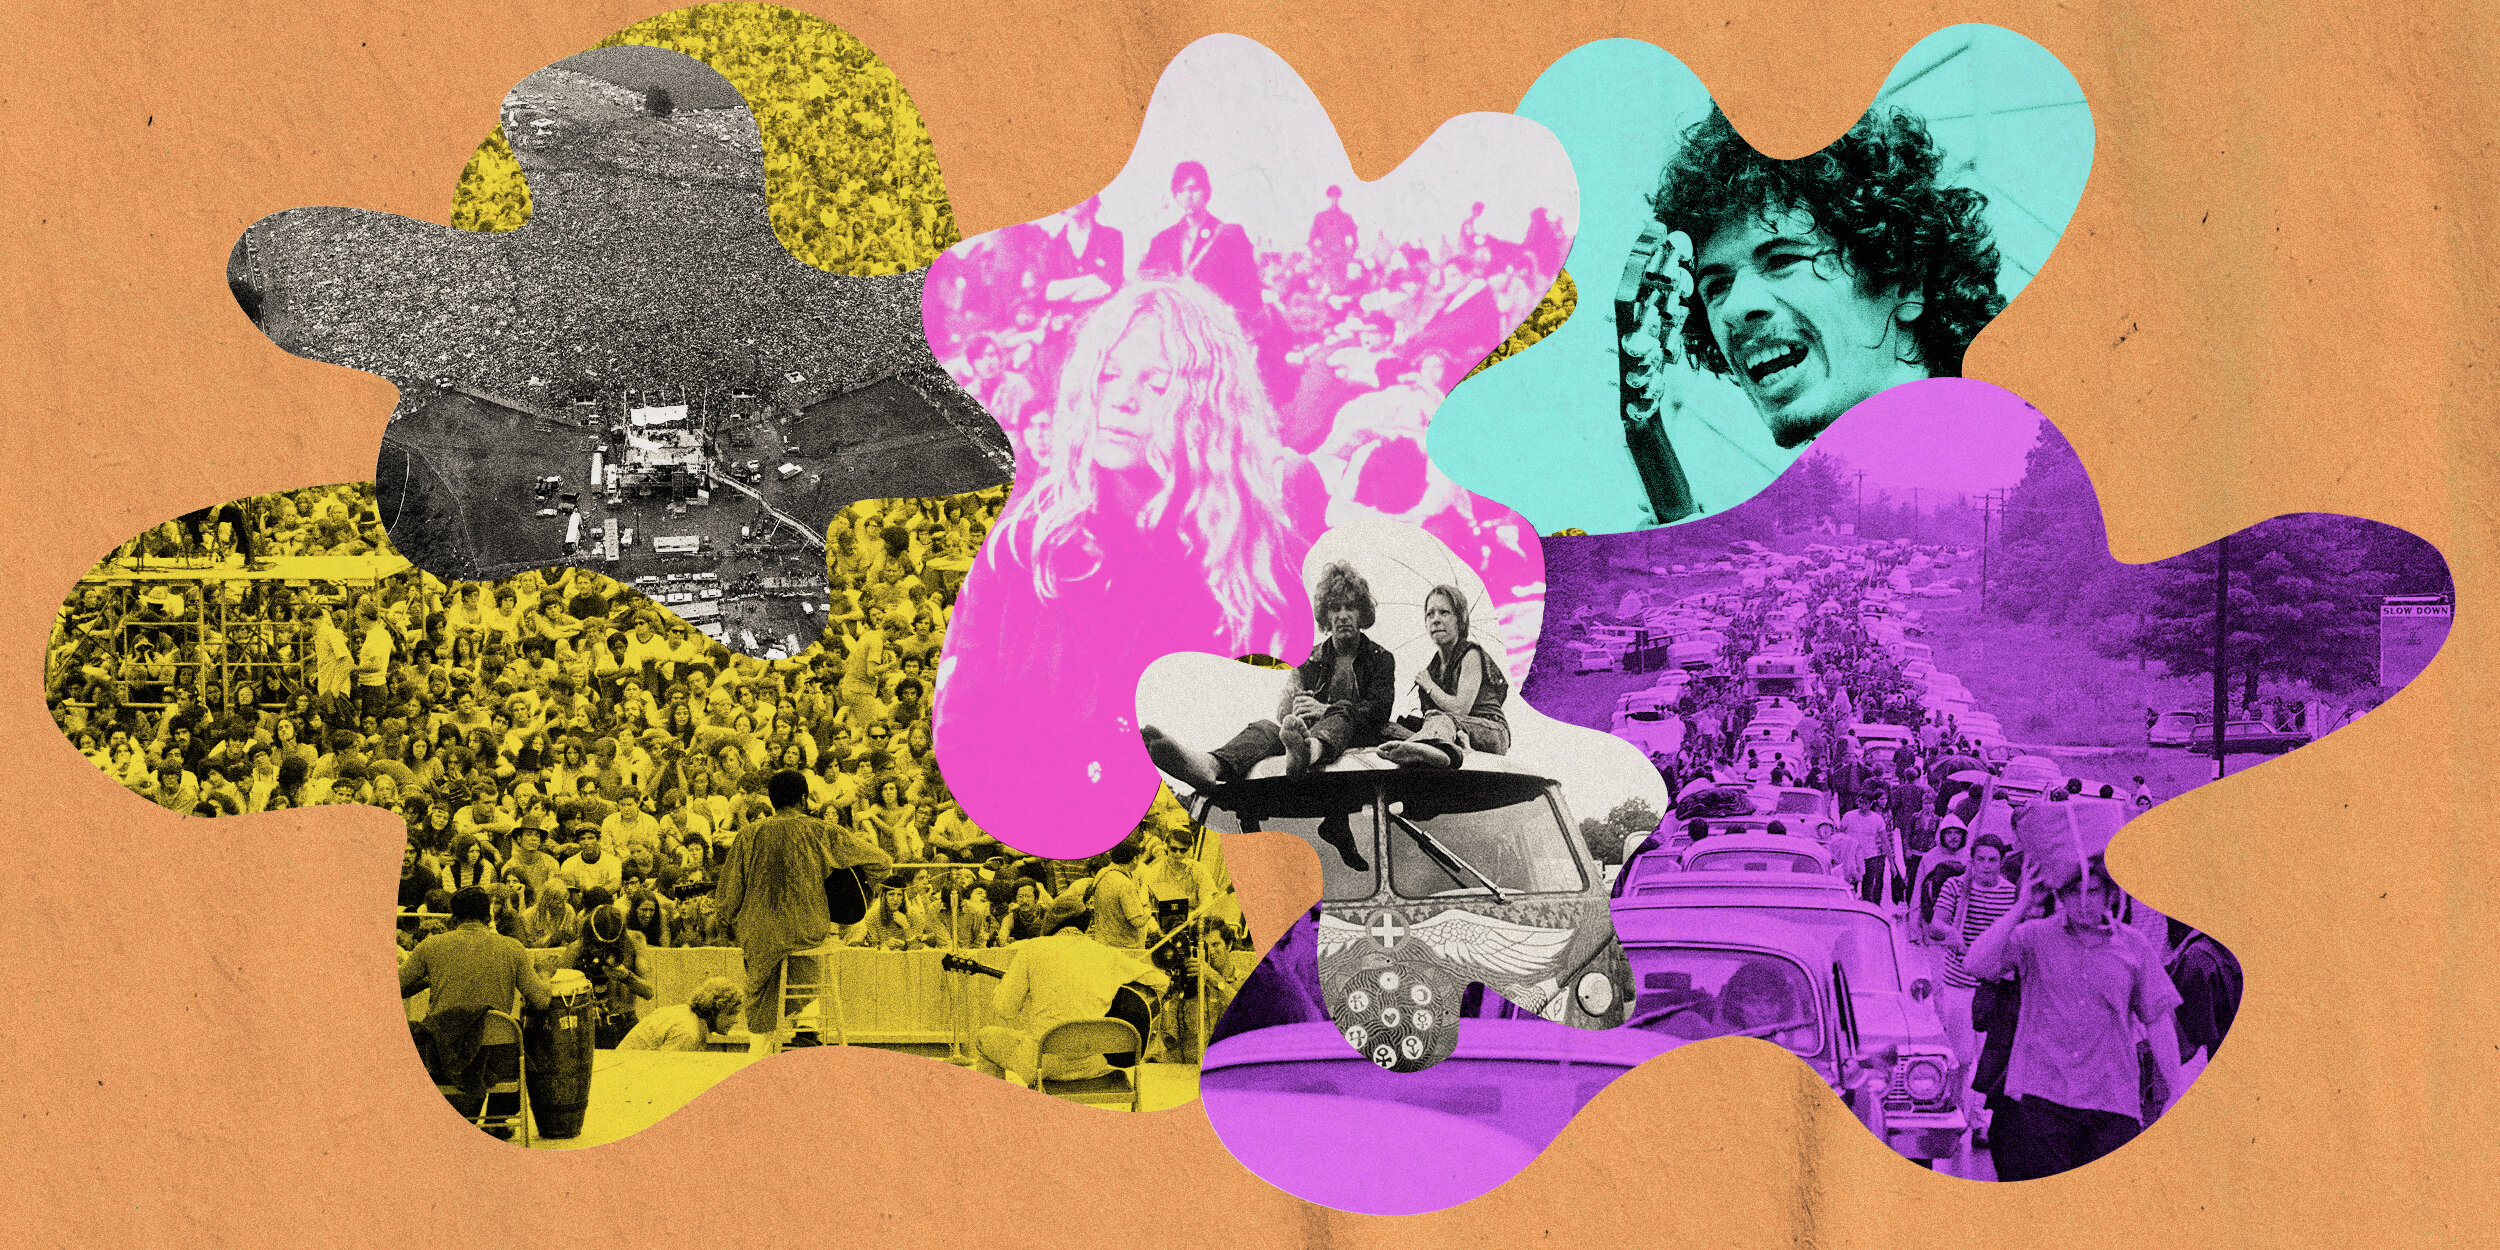   Woodstock 50 years ago changed music festivals forever — and not in a good way   AD :   Kara Haupt  